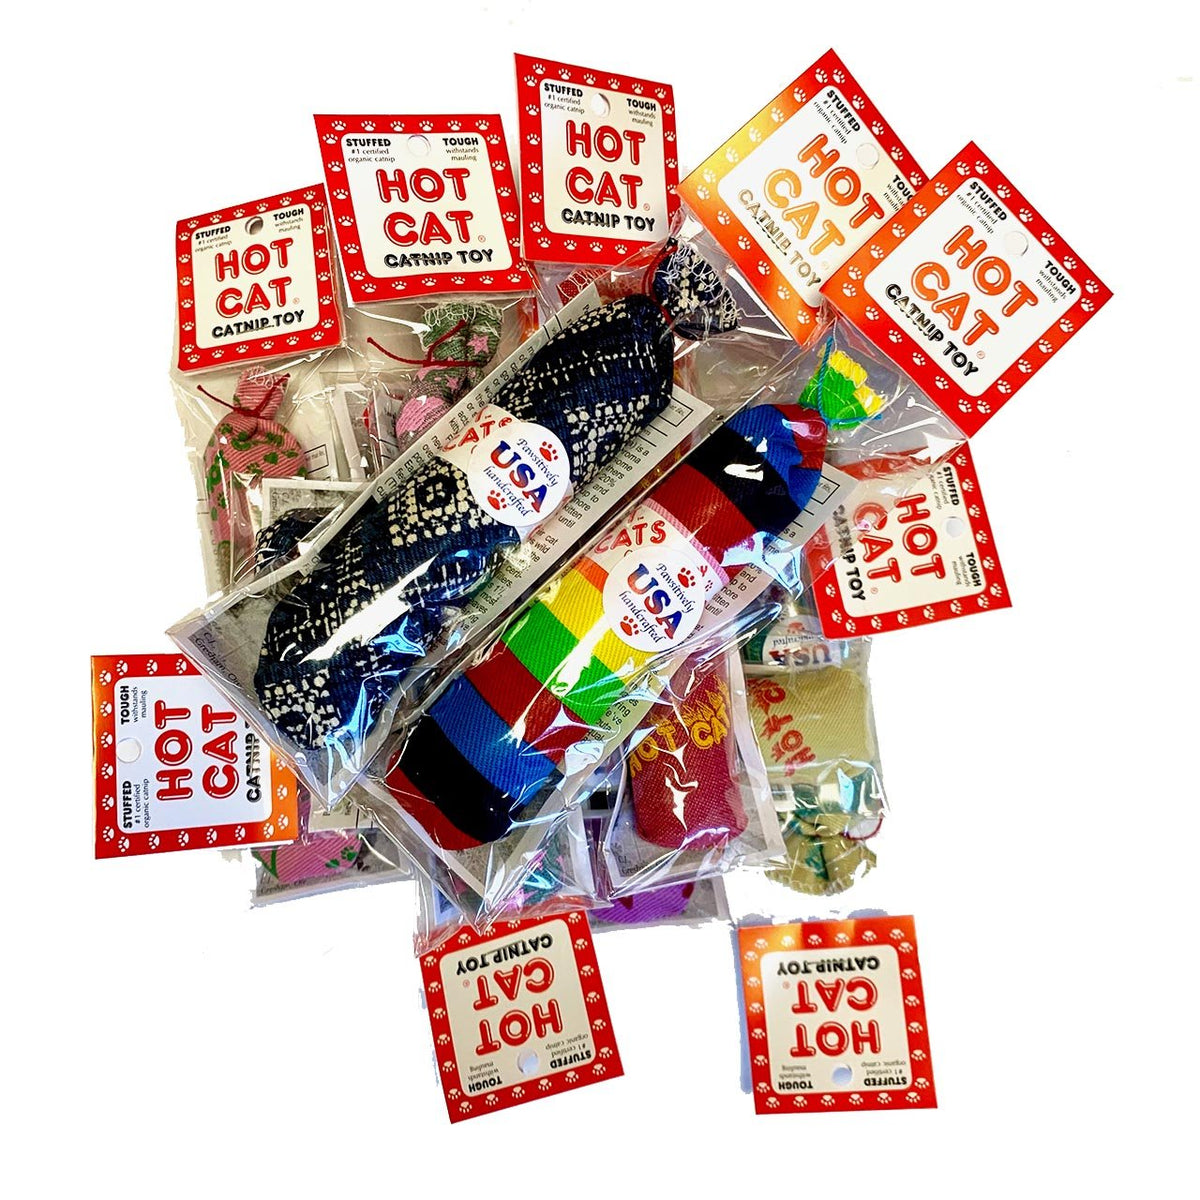 Colorful Sausage shaped toys filled with catnip, packaged in clear cellophane with cardboard tag.